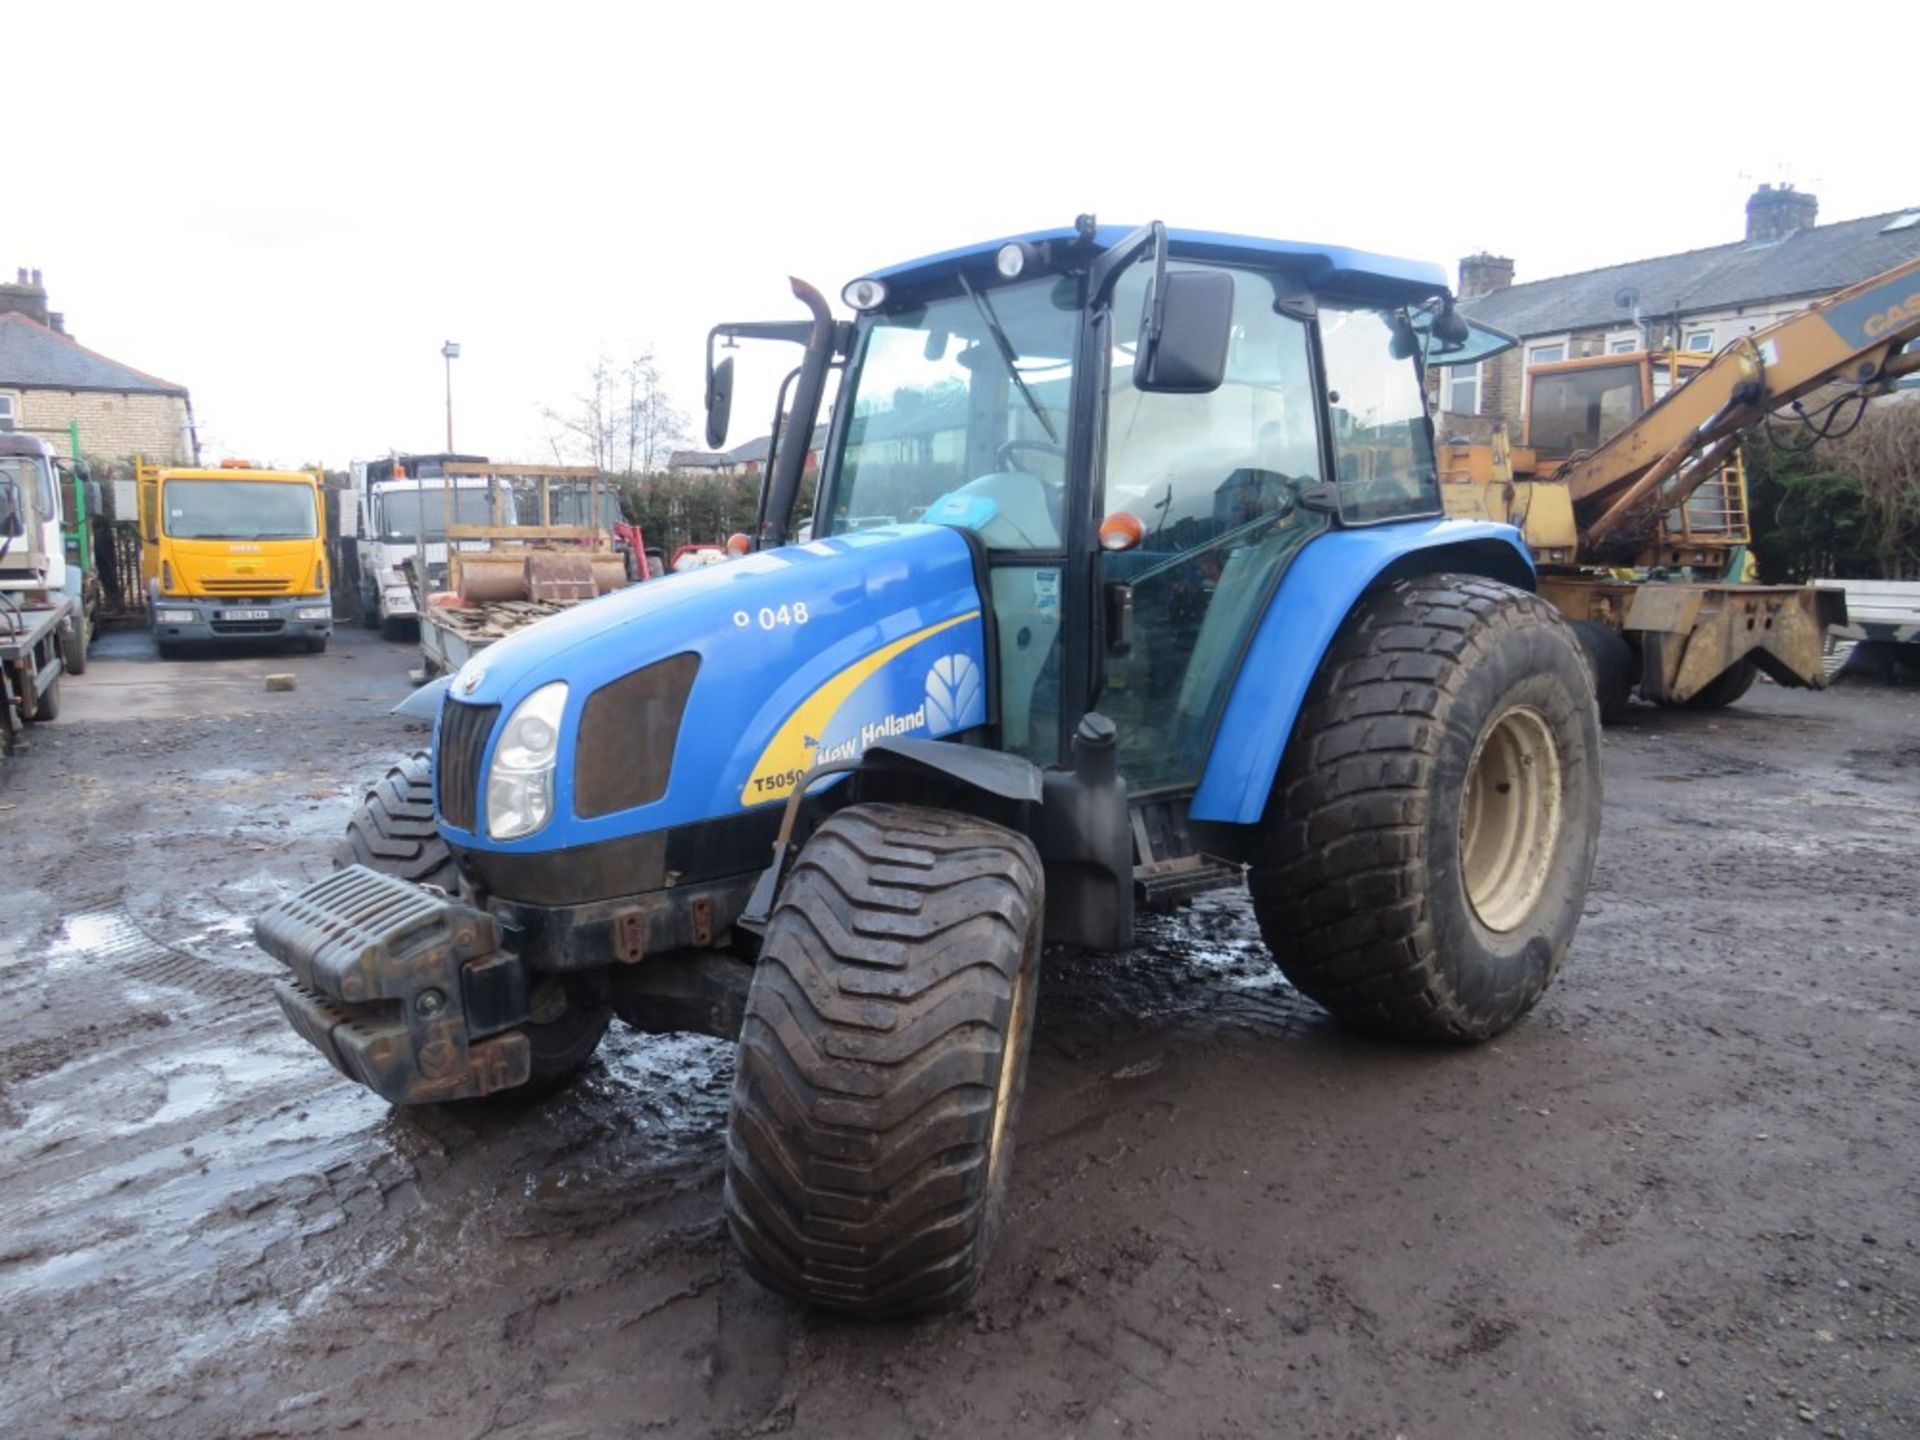 10 reg NEW HOLLAND T5060 TRACTOR (DIRECT COUNCIL) 1ST REG 06/10, 7359 HOURS, V5 HERE, 1 OWNER FROM - Image 2 of 6